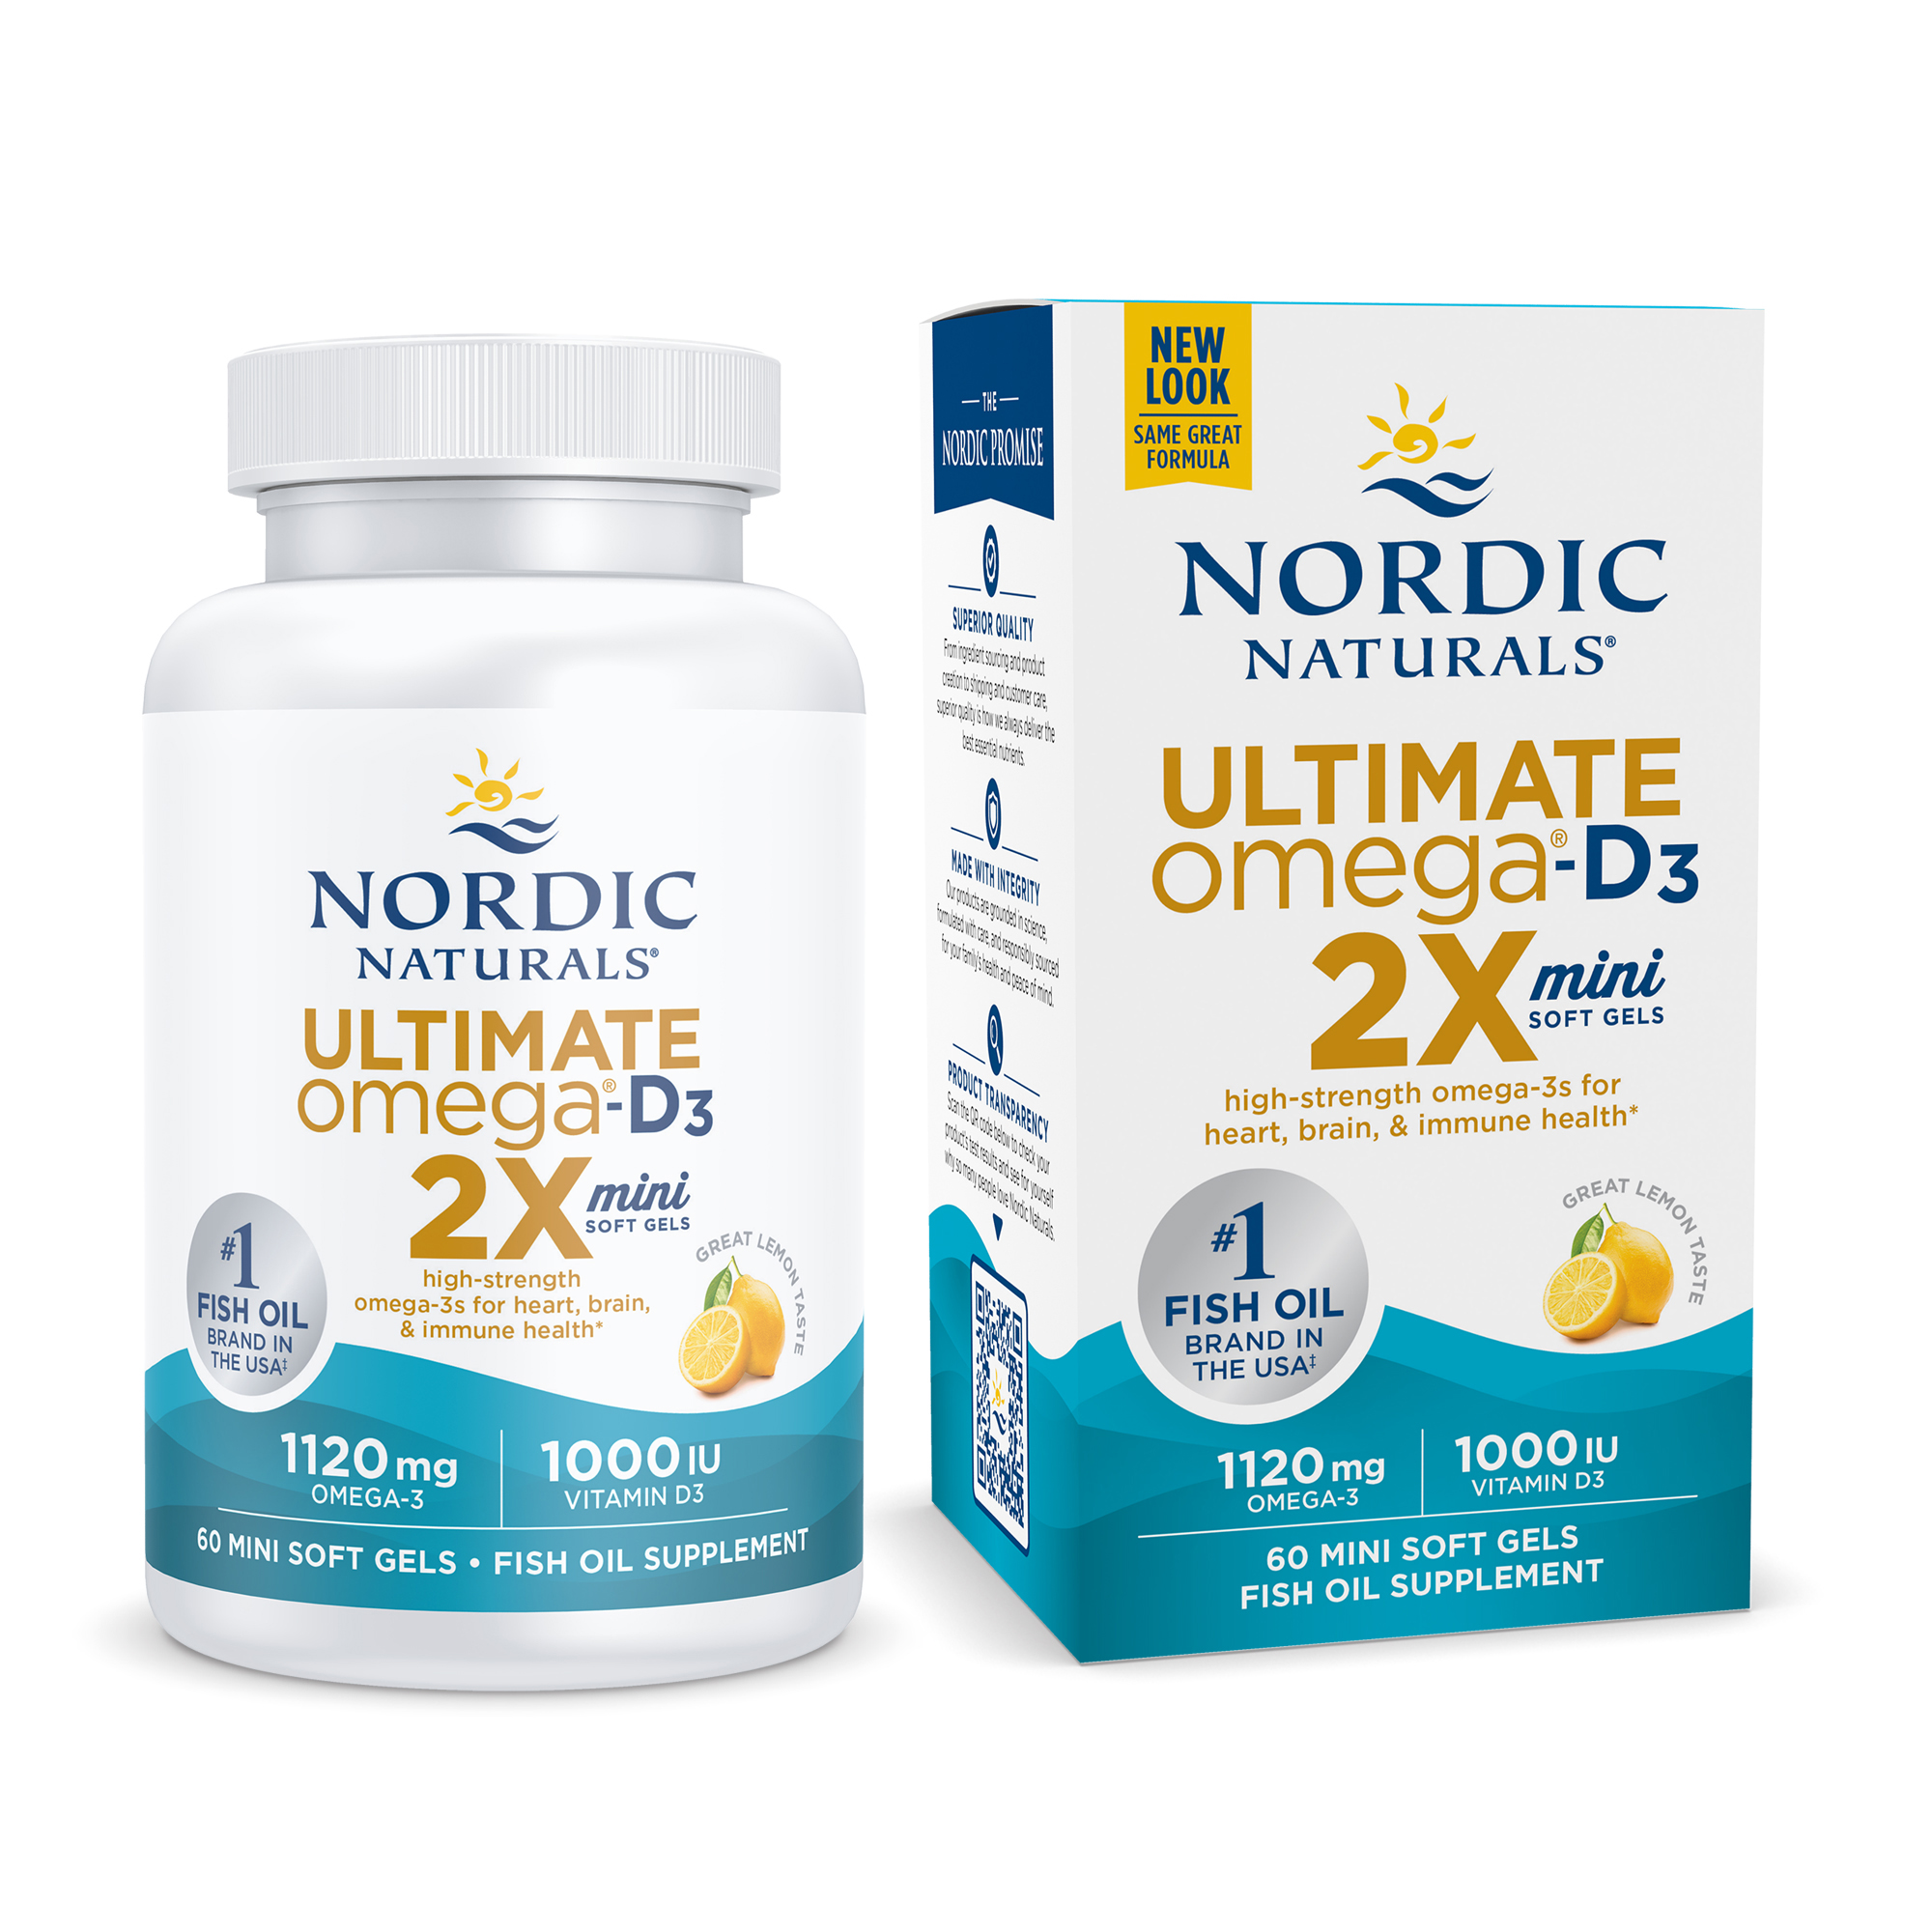 Nordic Naturals Ultimate Omega 2X Mini with D3, Softgels, 1120 Mg, 60 Ct - image 1 of 8